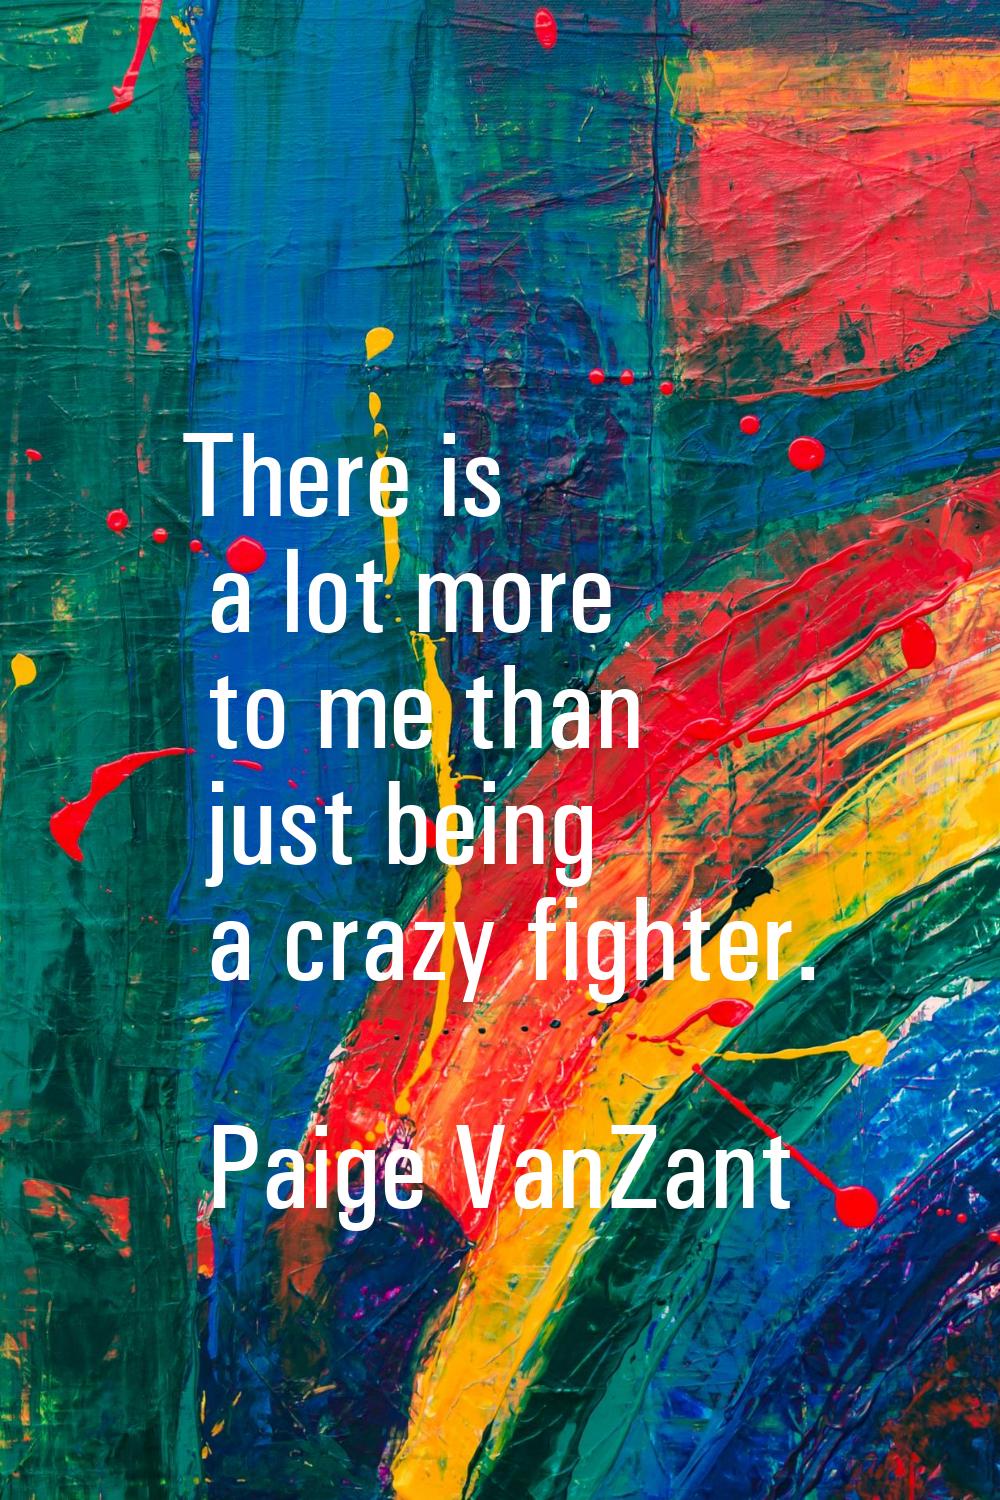 There is a lot more to me than just being a crazy fighter.